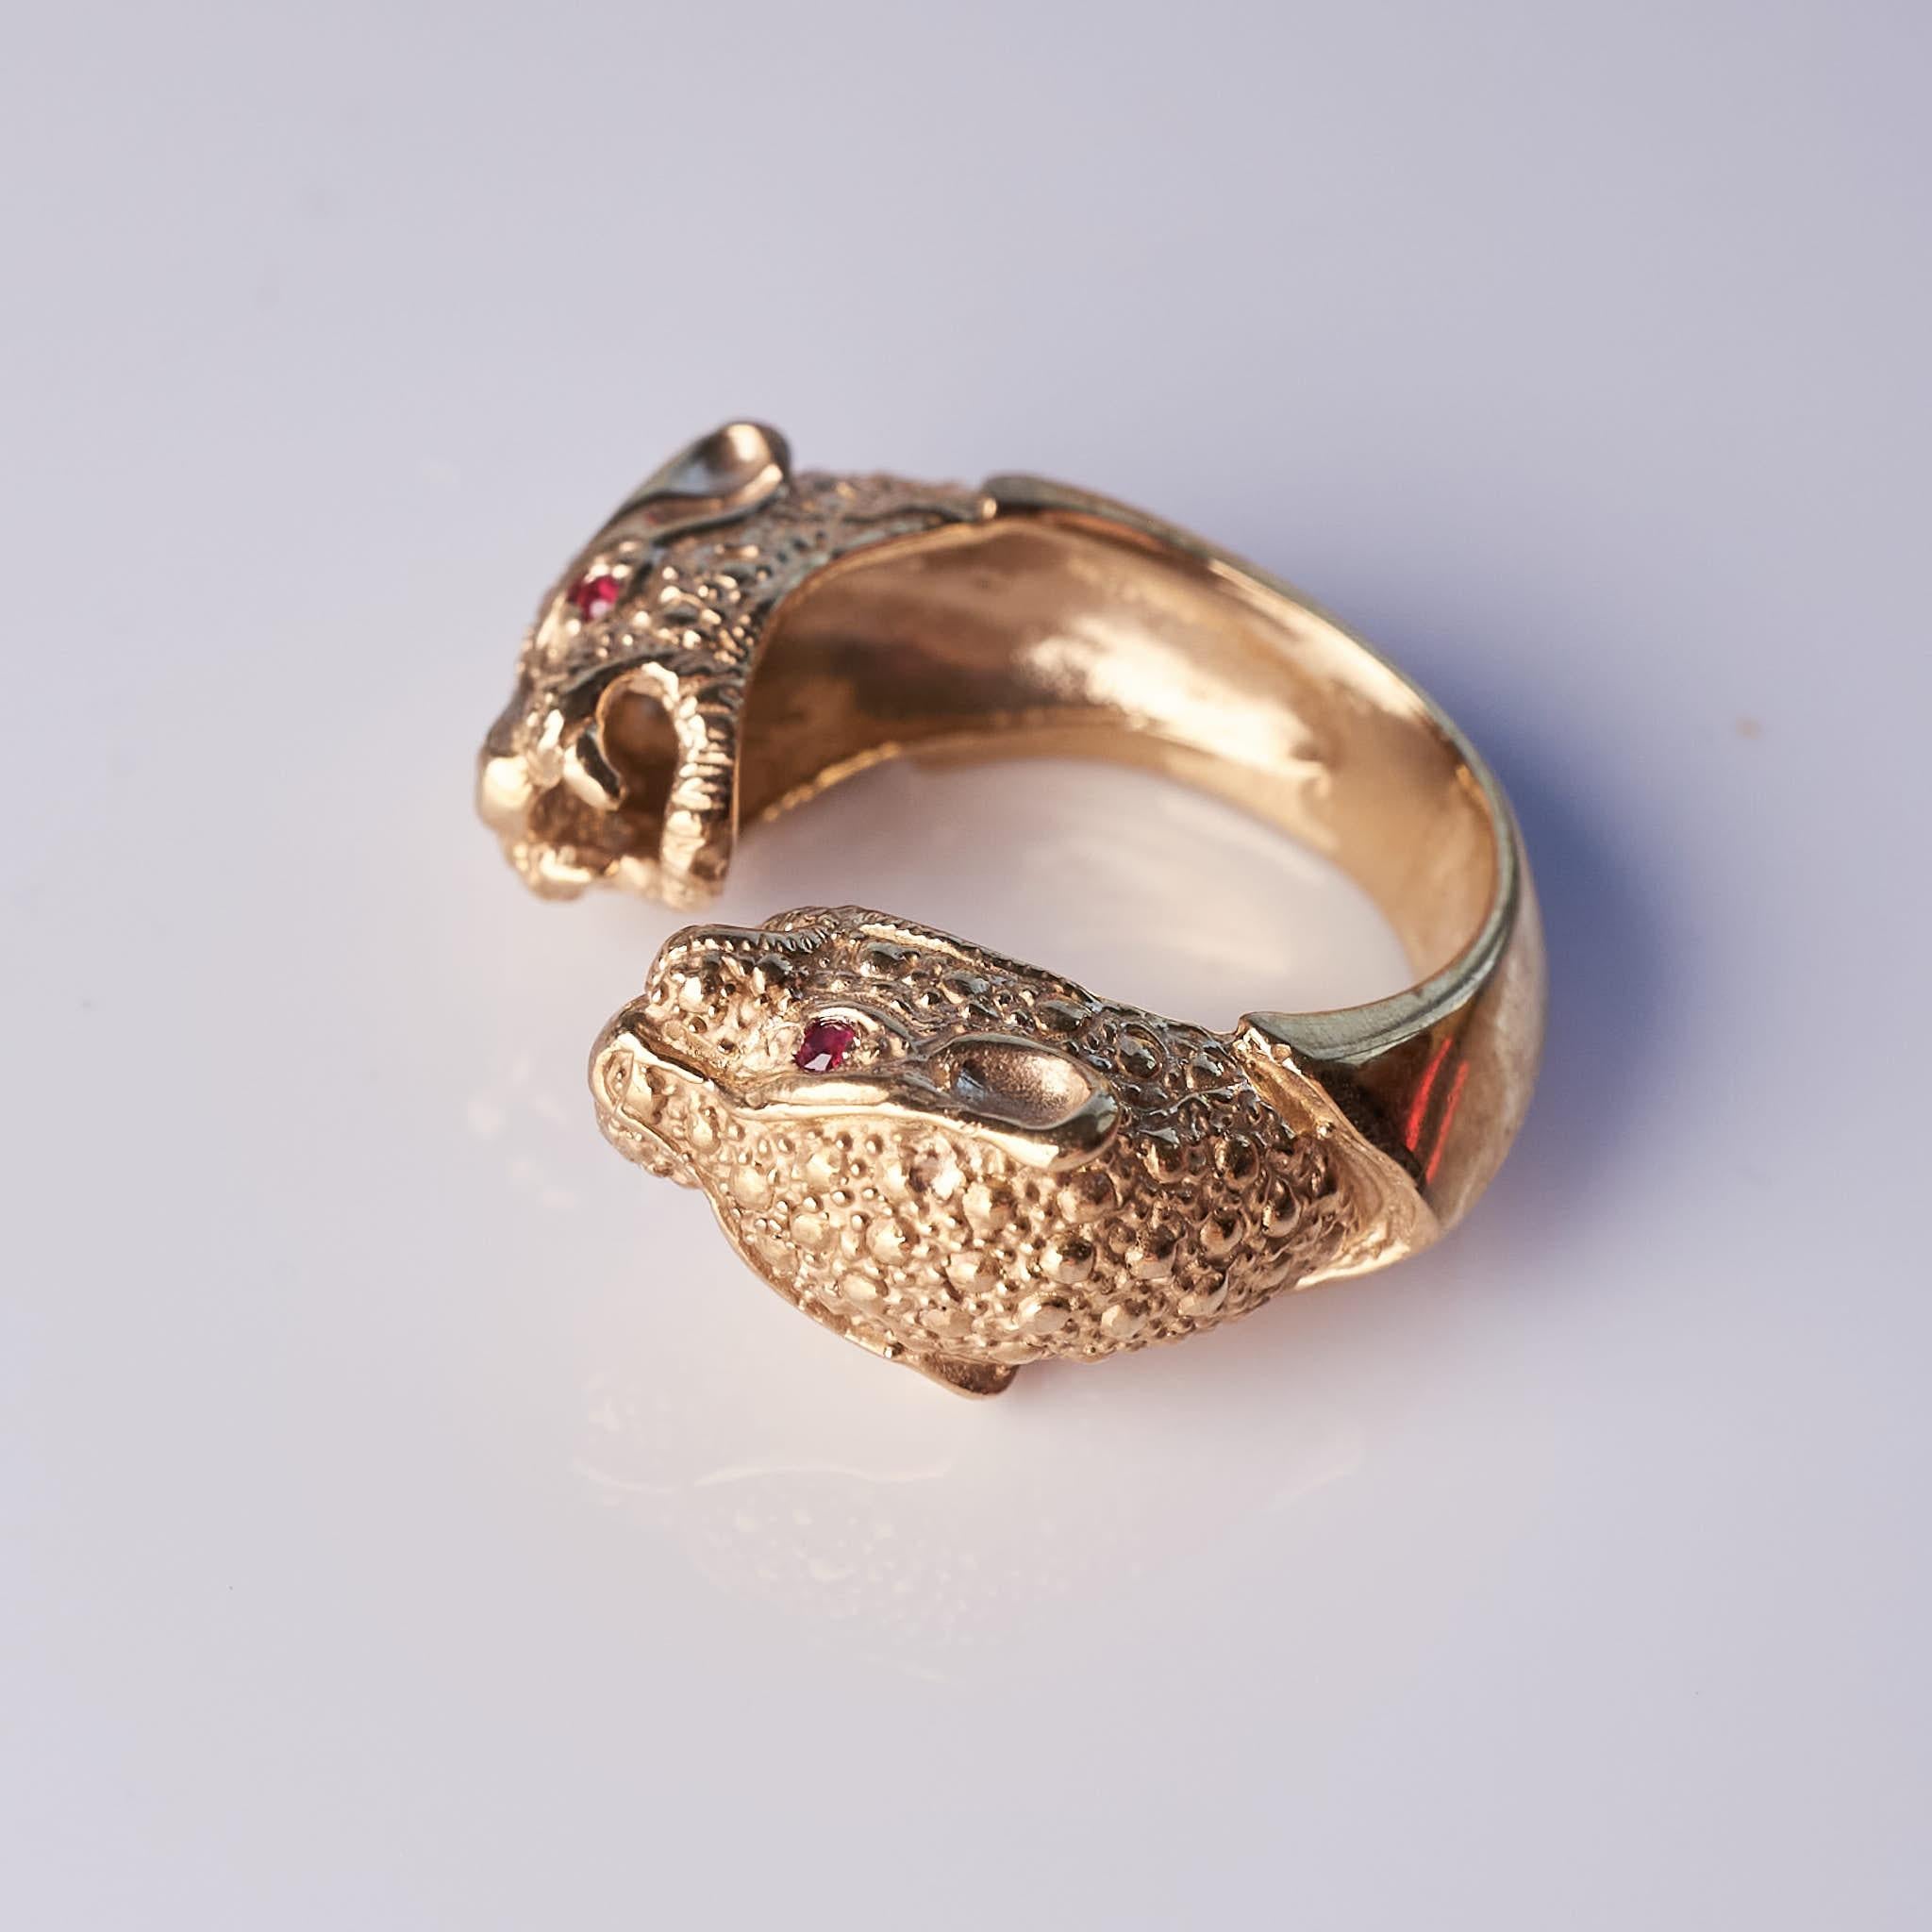 Ruby Jaguar Ring Bronze Animal J Dauphin In New Condition For Sale In Los Angeles, CA